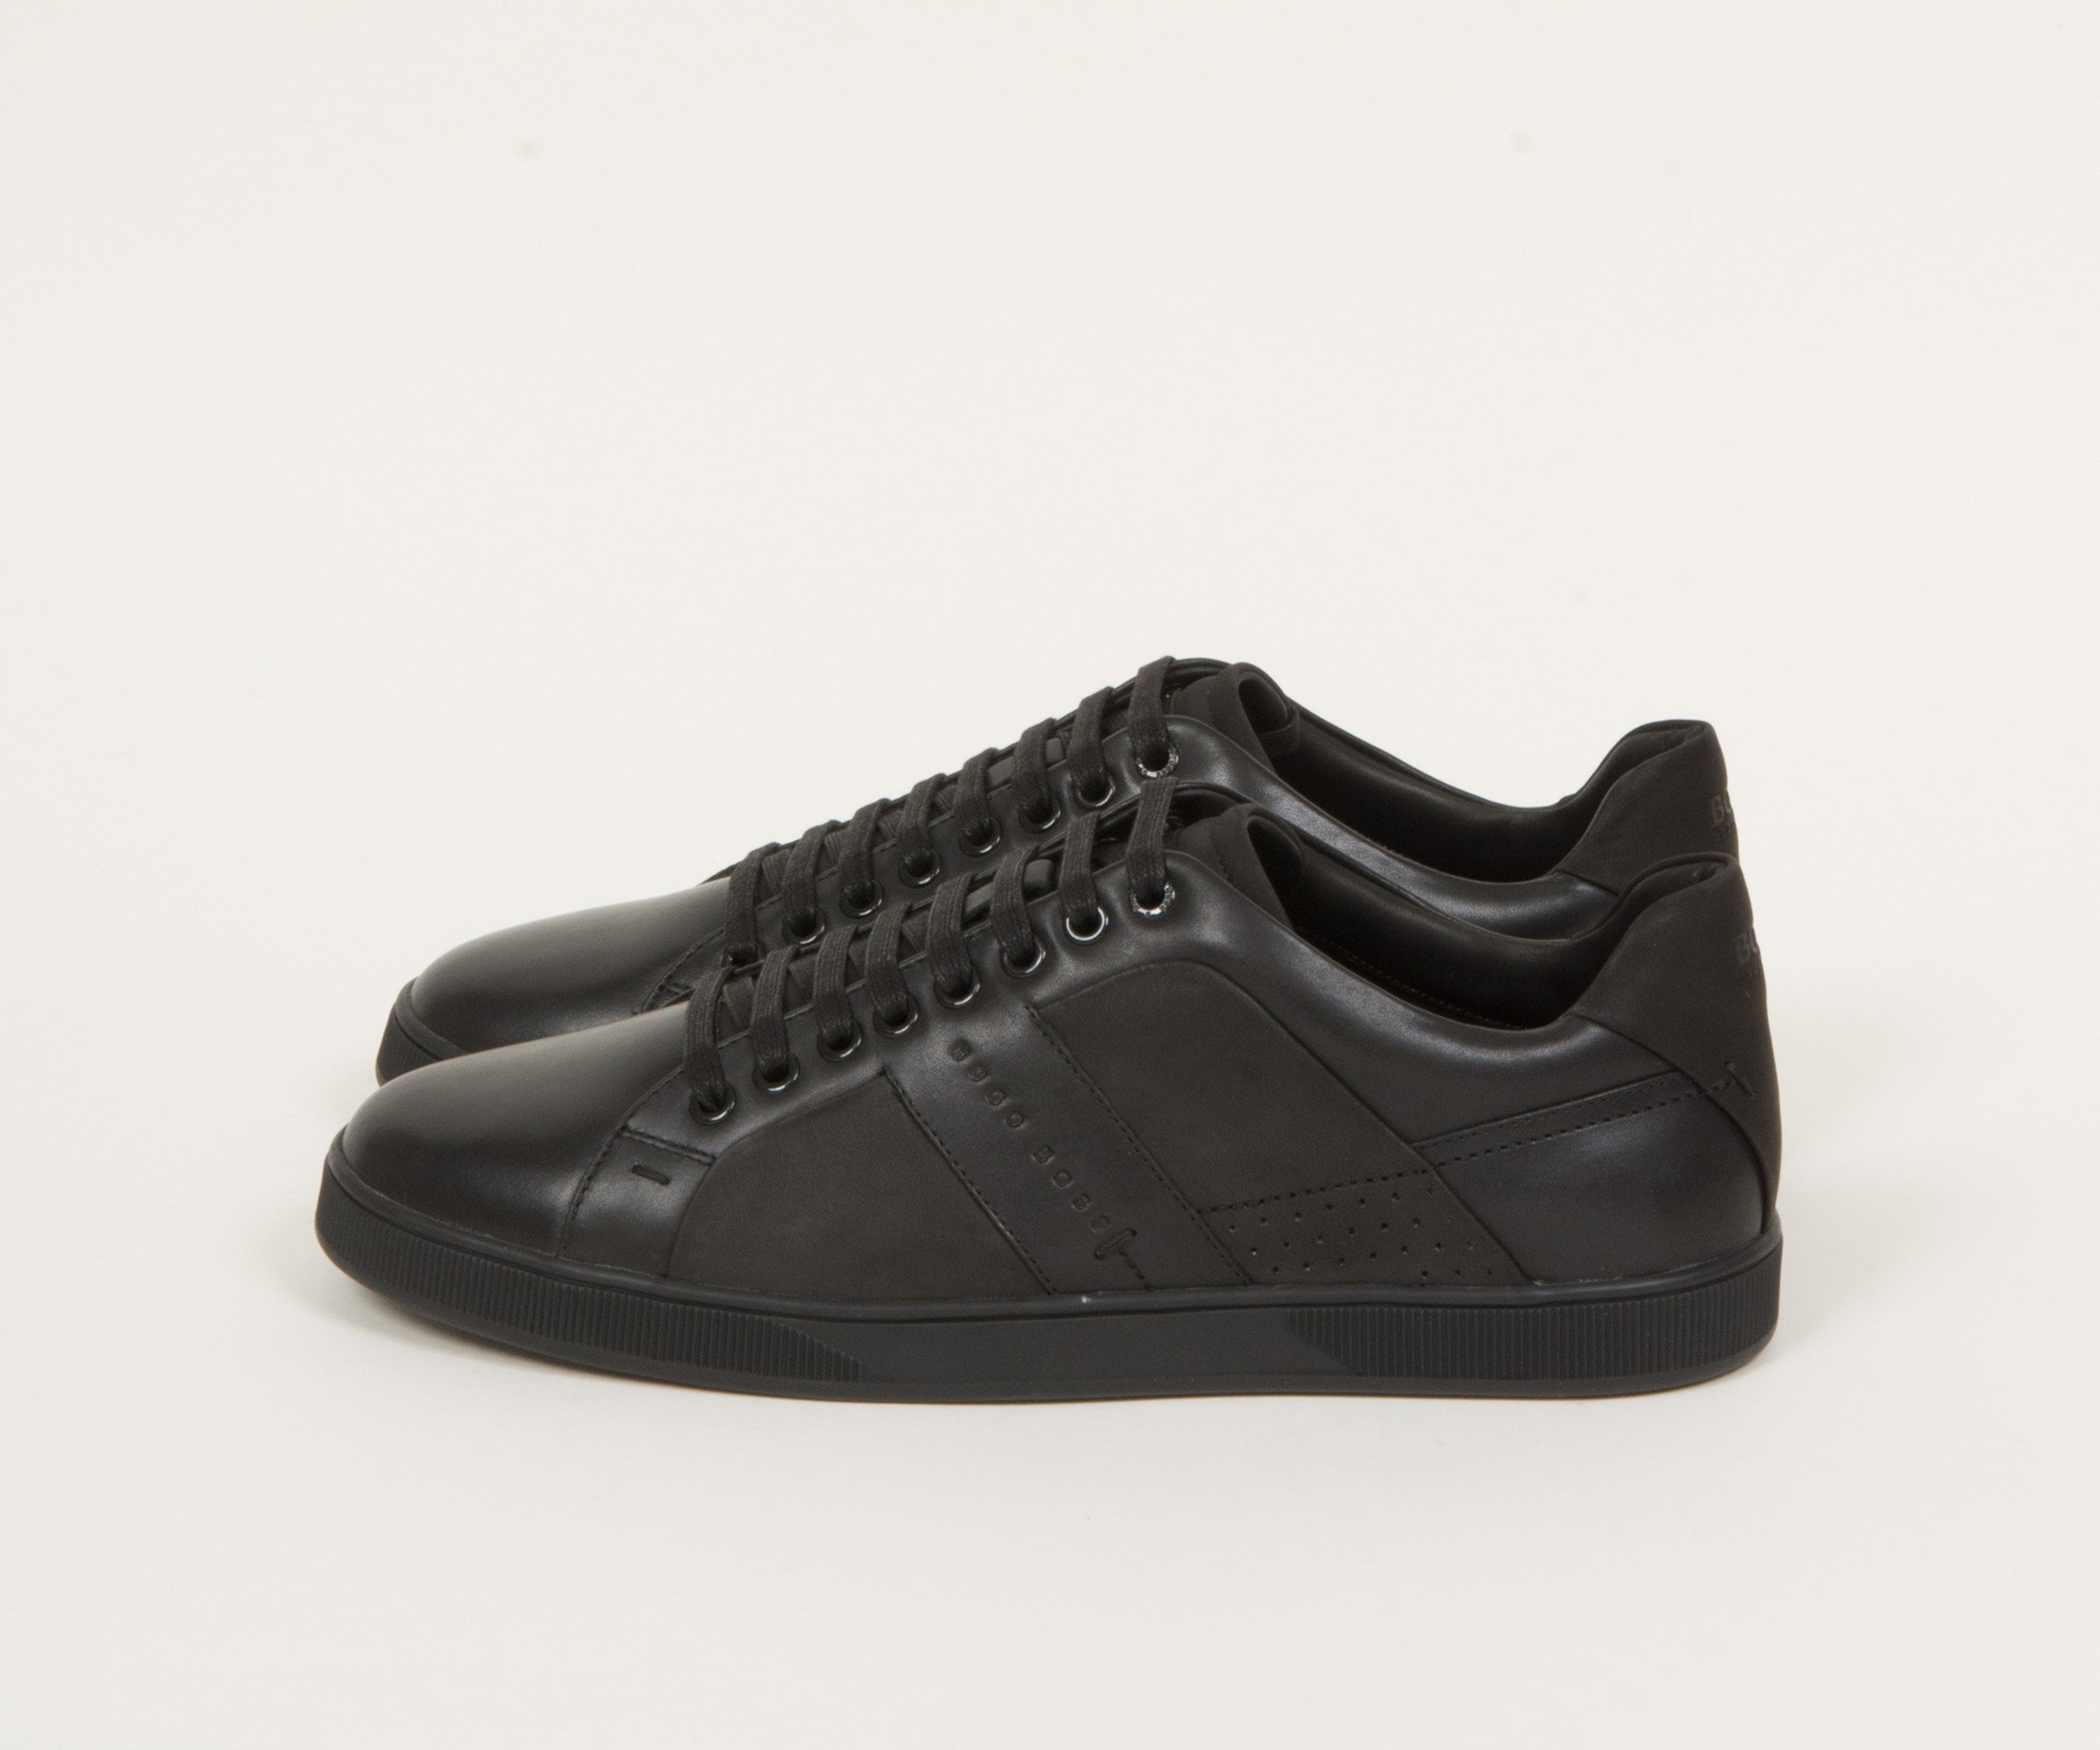 Hugo 'Acros' Leather Sneakers With Textile Inserts Black (Minor Damage)